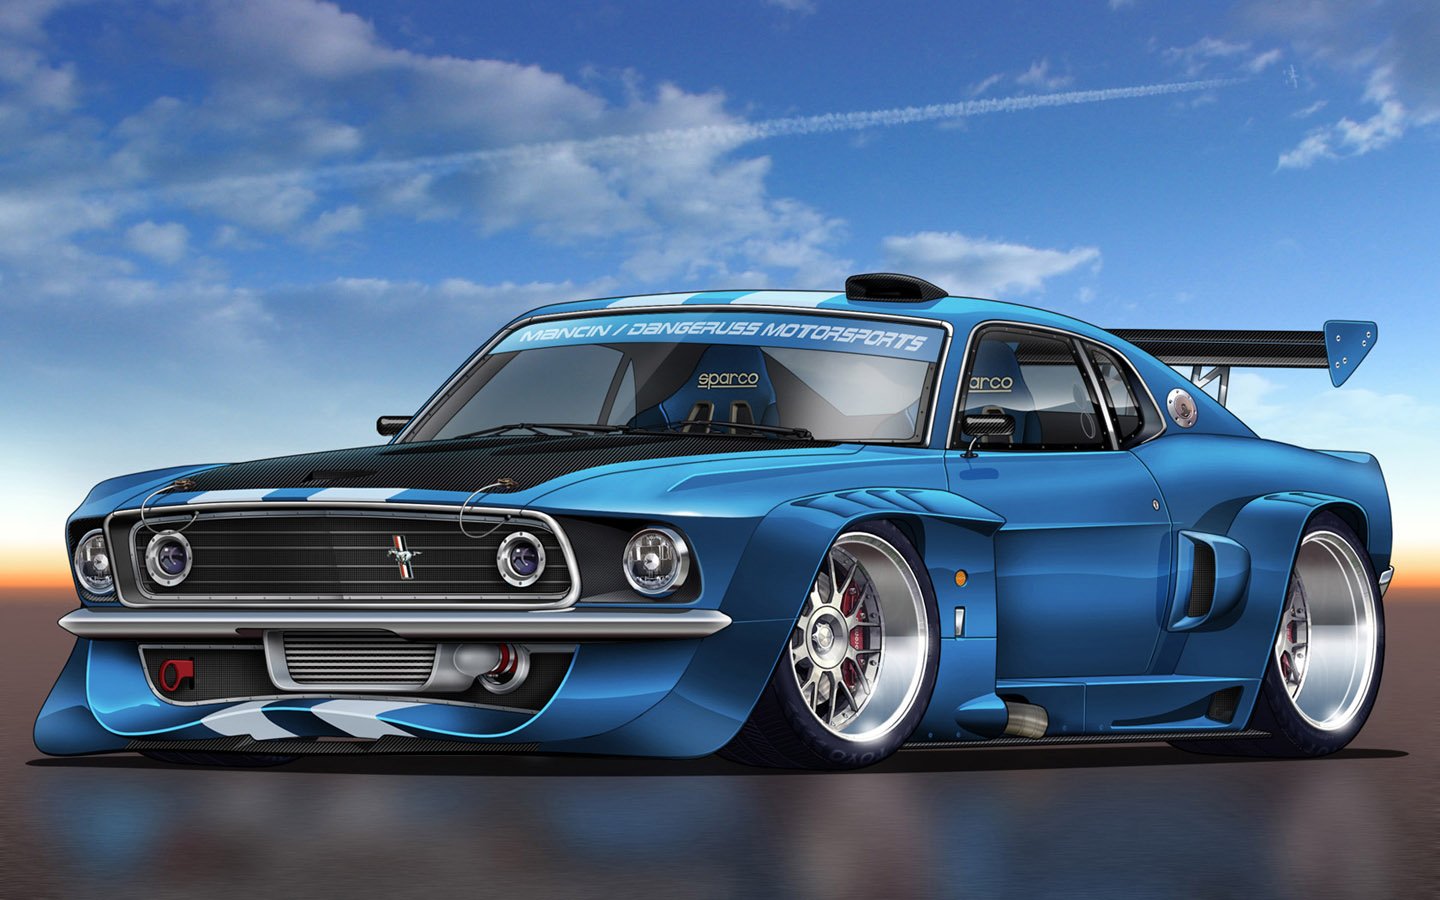 Muscle car wallpaper download muscle car wallpaper 57331 with 1440x900